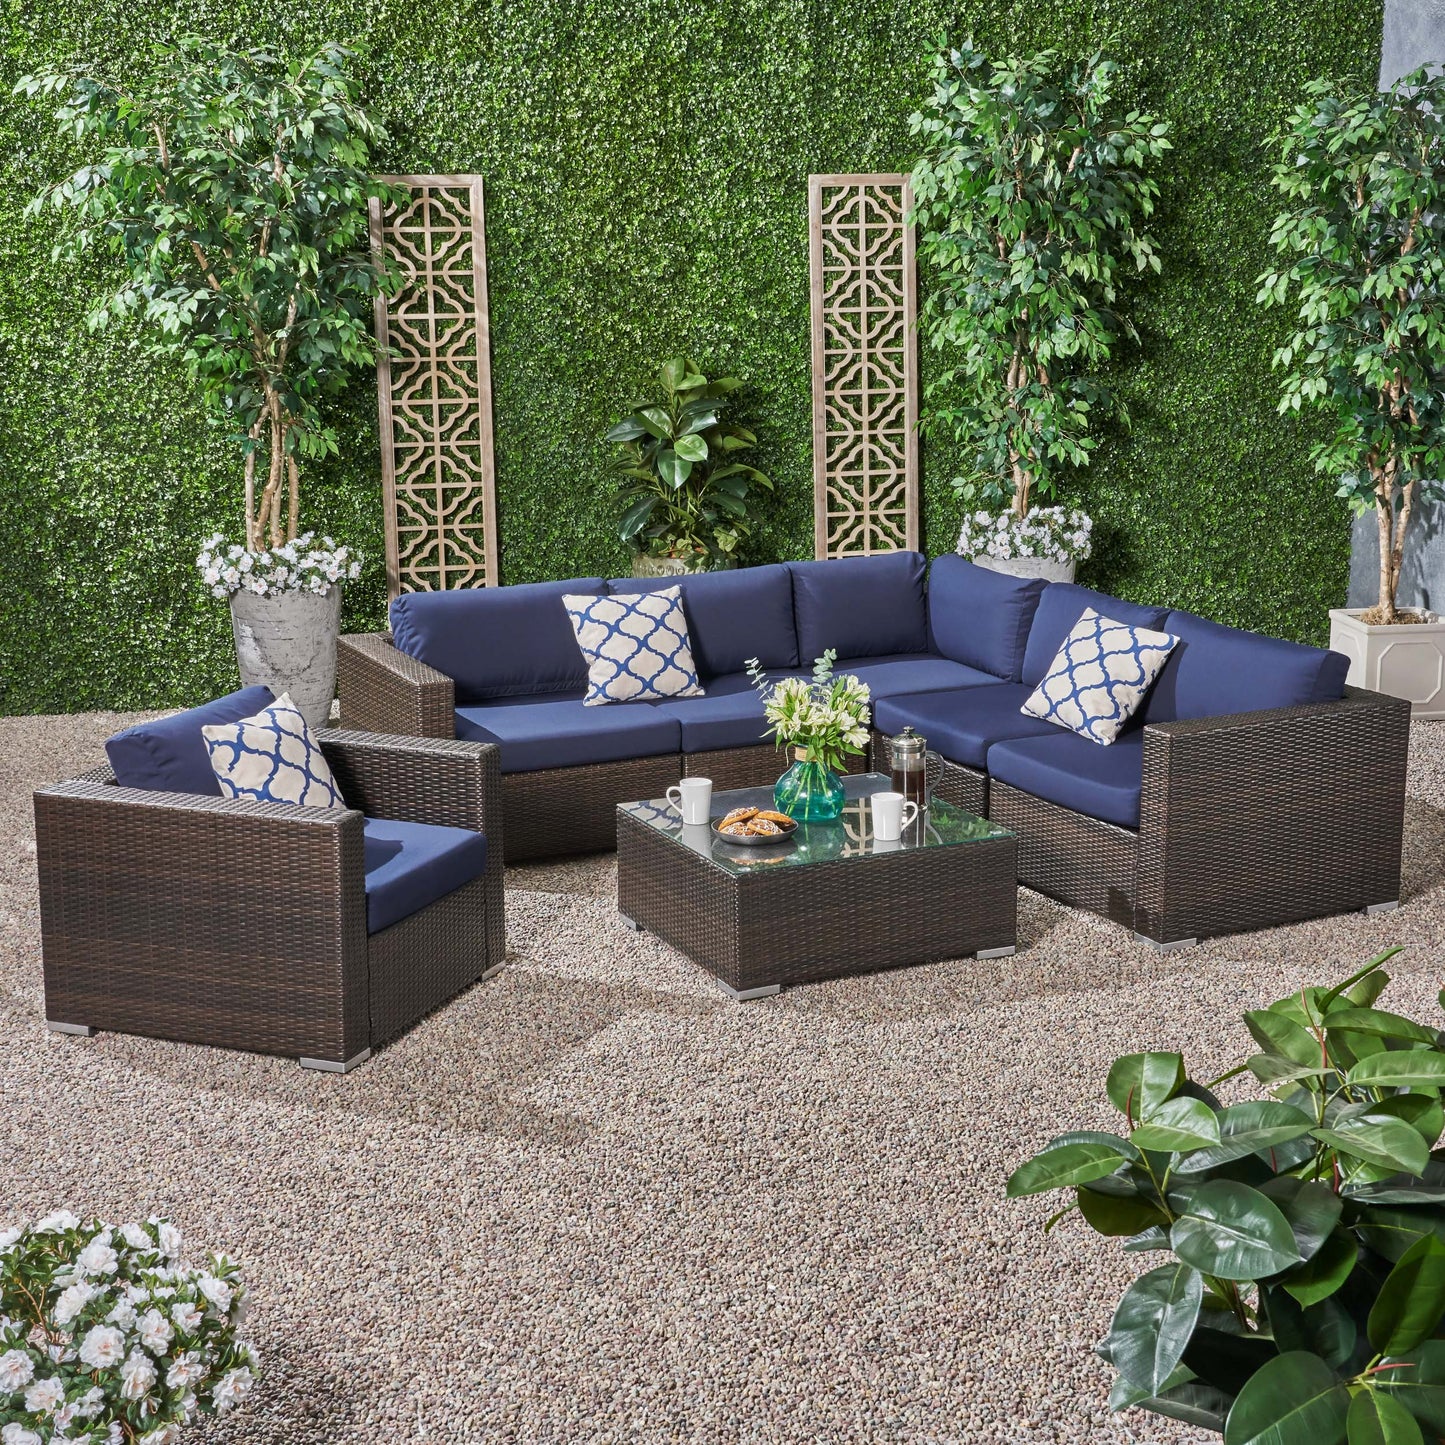 Kyra Outdoor 6 Seater Wicker Sectional Sofa Set with Sunbrella Cushions